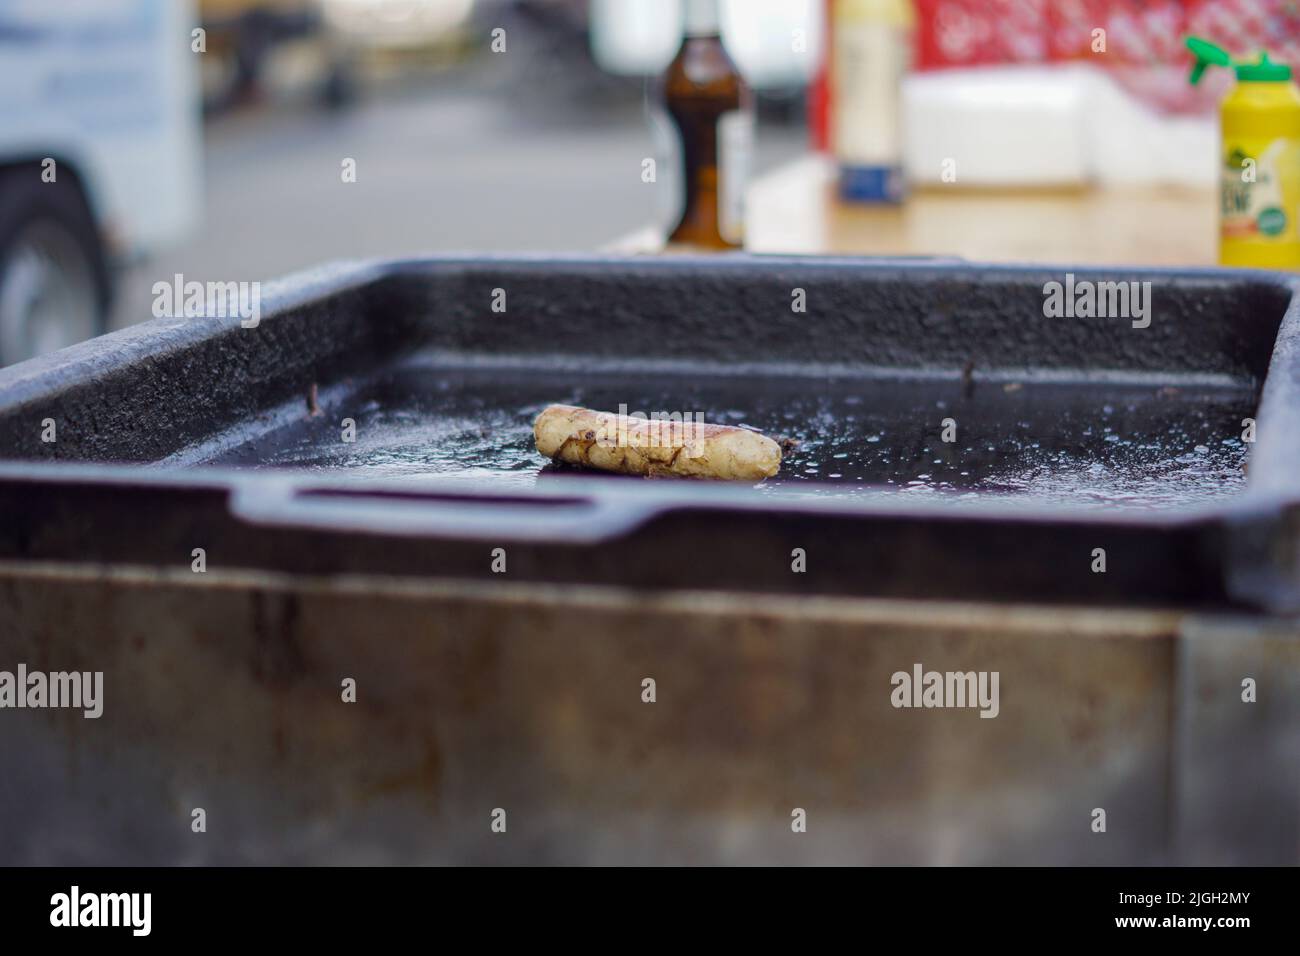 Sausage on a steel plate Stock Photo